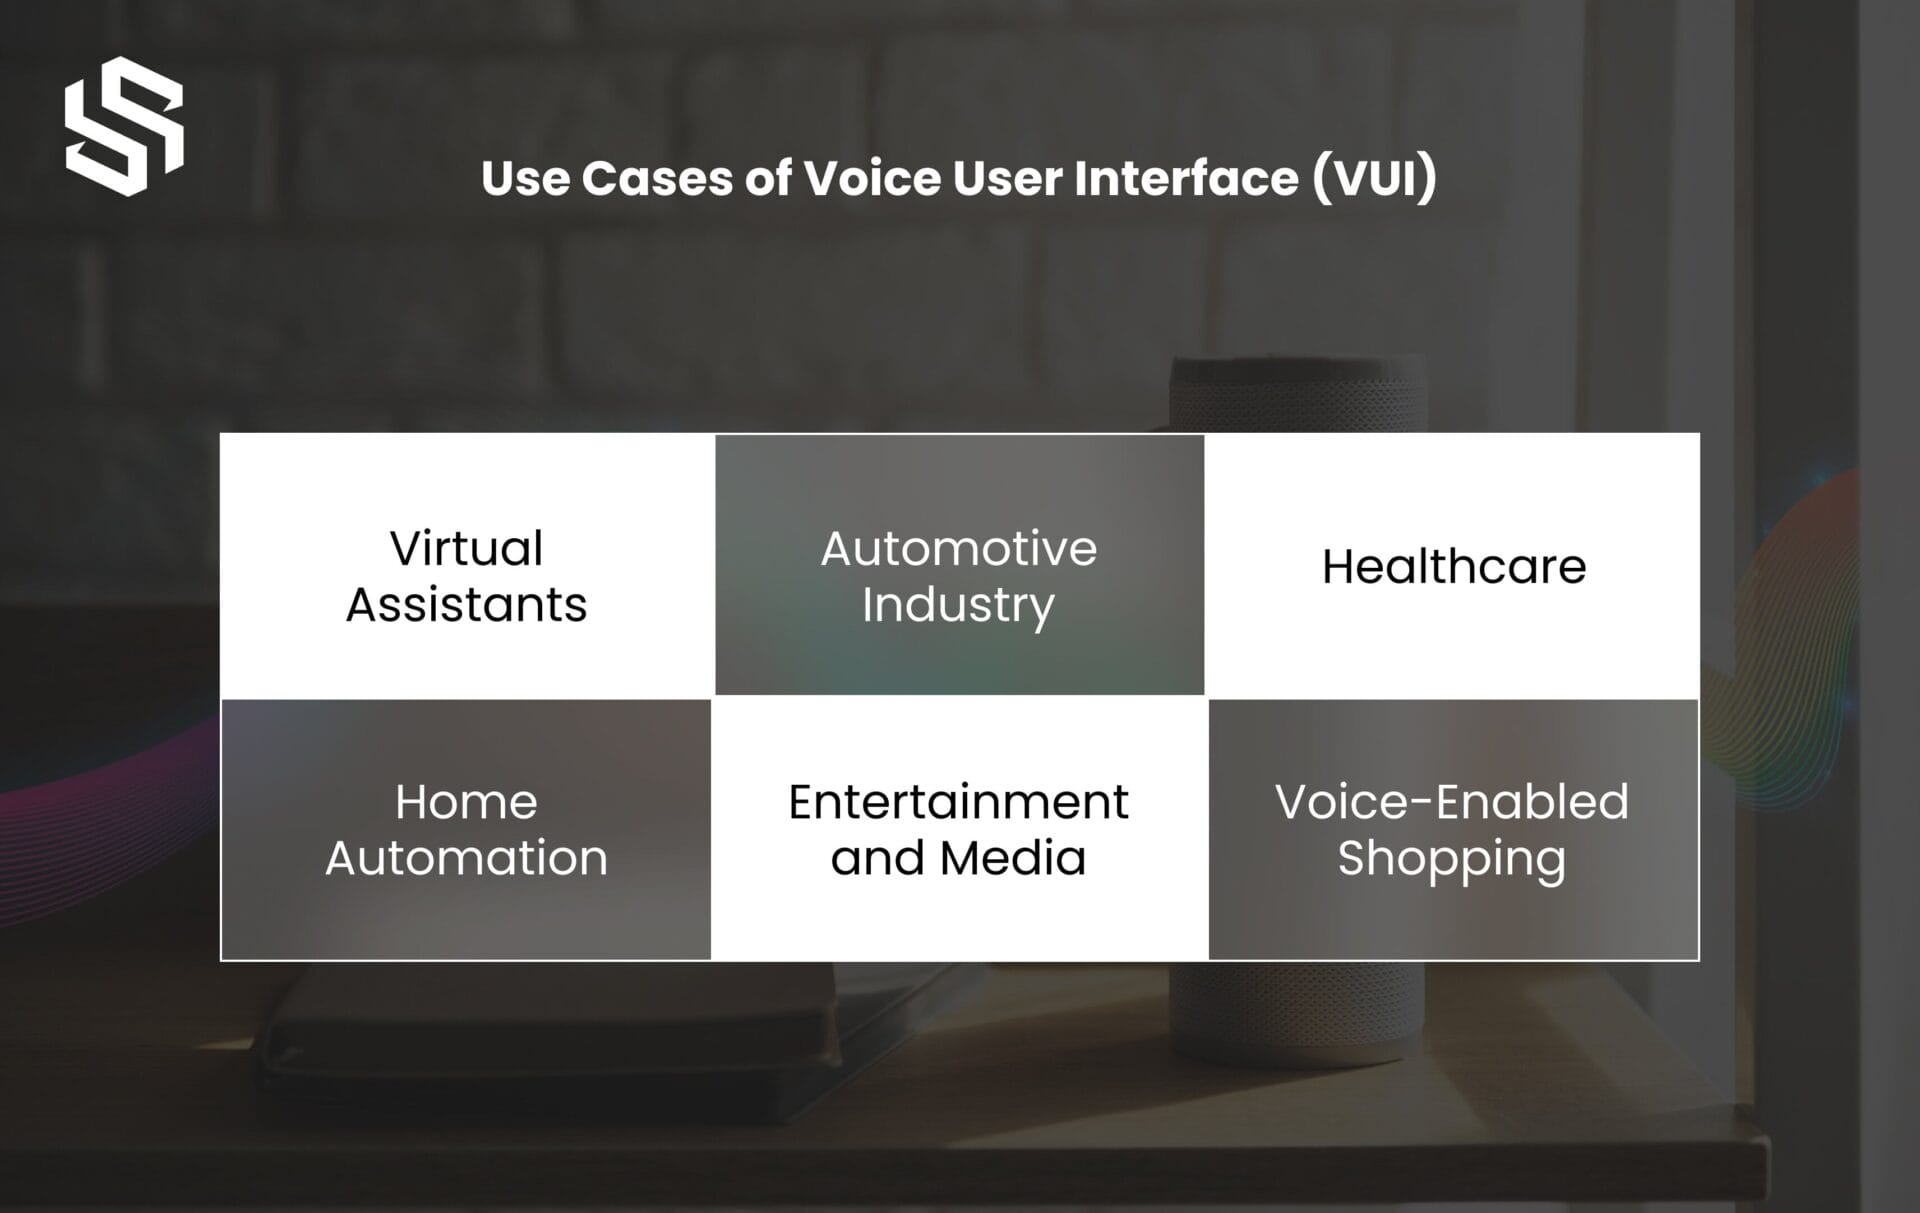 Use Cases of Voice User Interface (VUI)